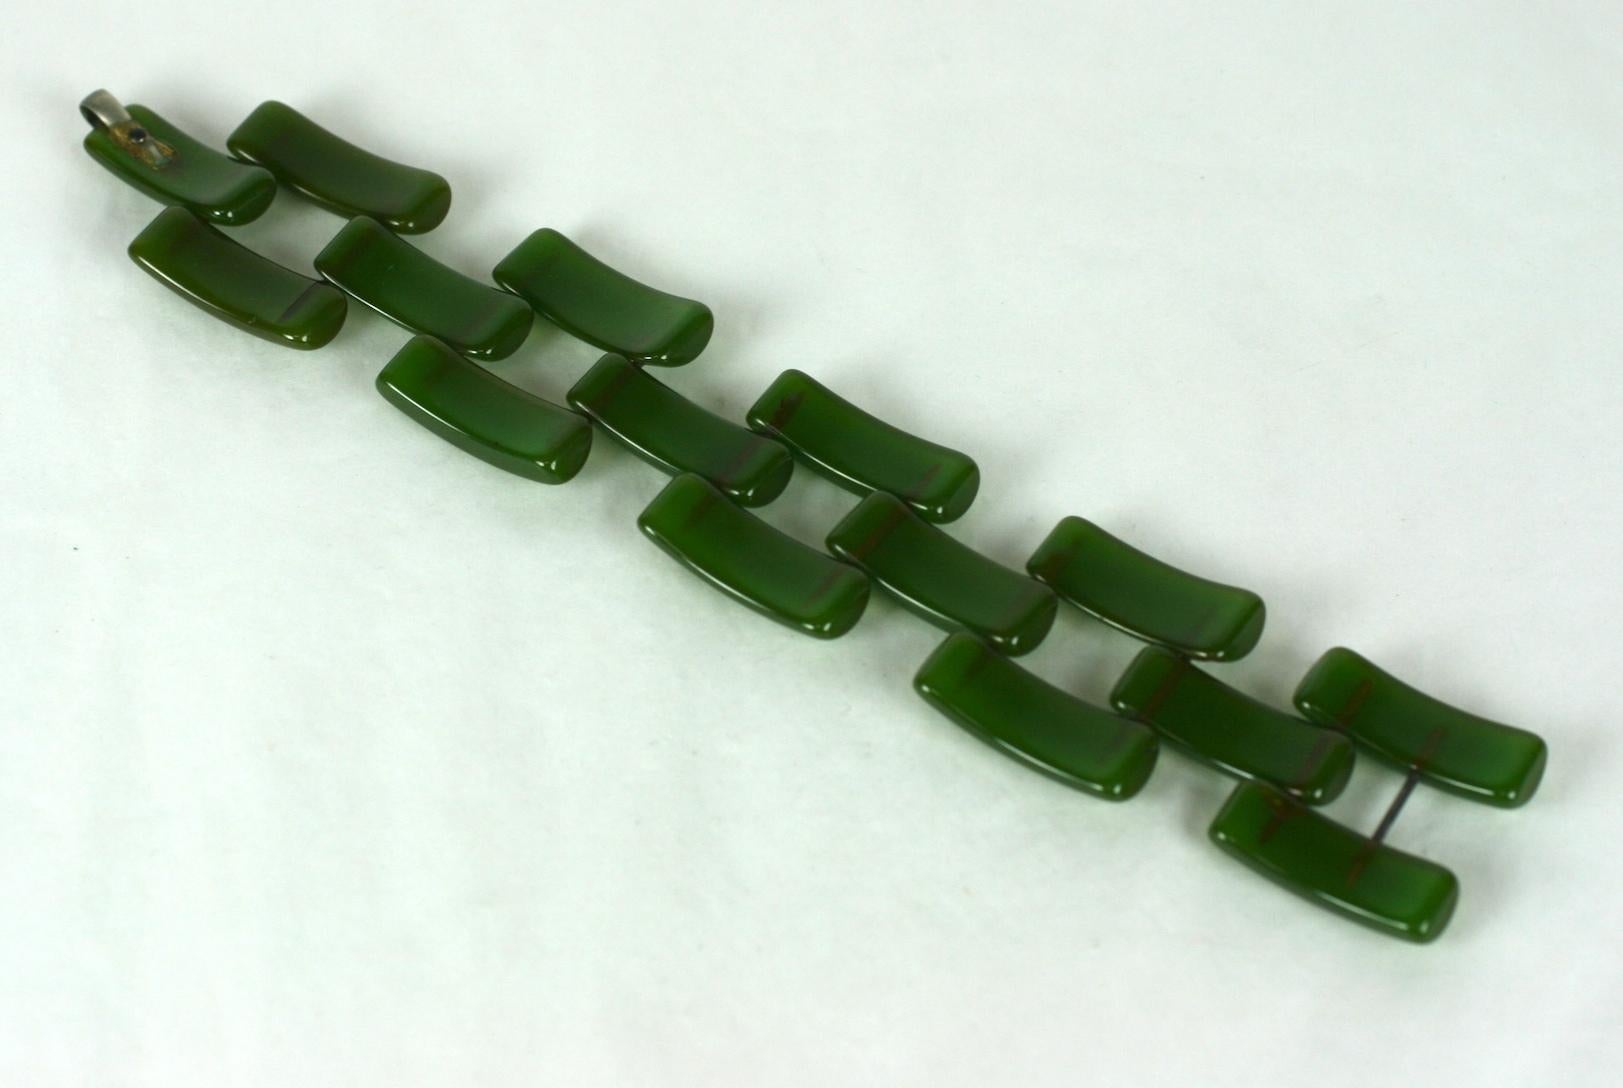 Art Deco Bakelite Link Bracelet in jade green. Curved strips of carved bakelite are pegged with metal rods to form a tank style
flexible design. Wonderful translucent green coloration.  1930's USA. Self hook closure.
Excellent condition. 8